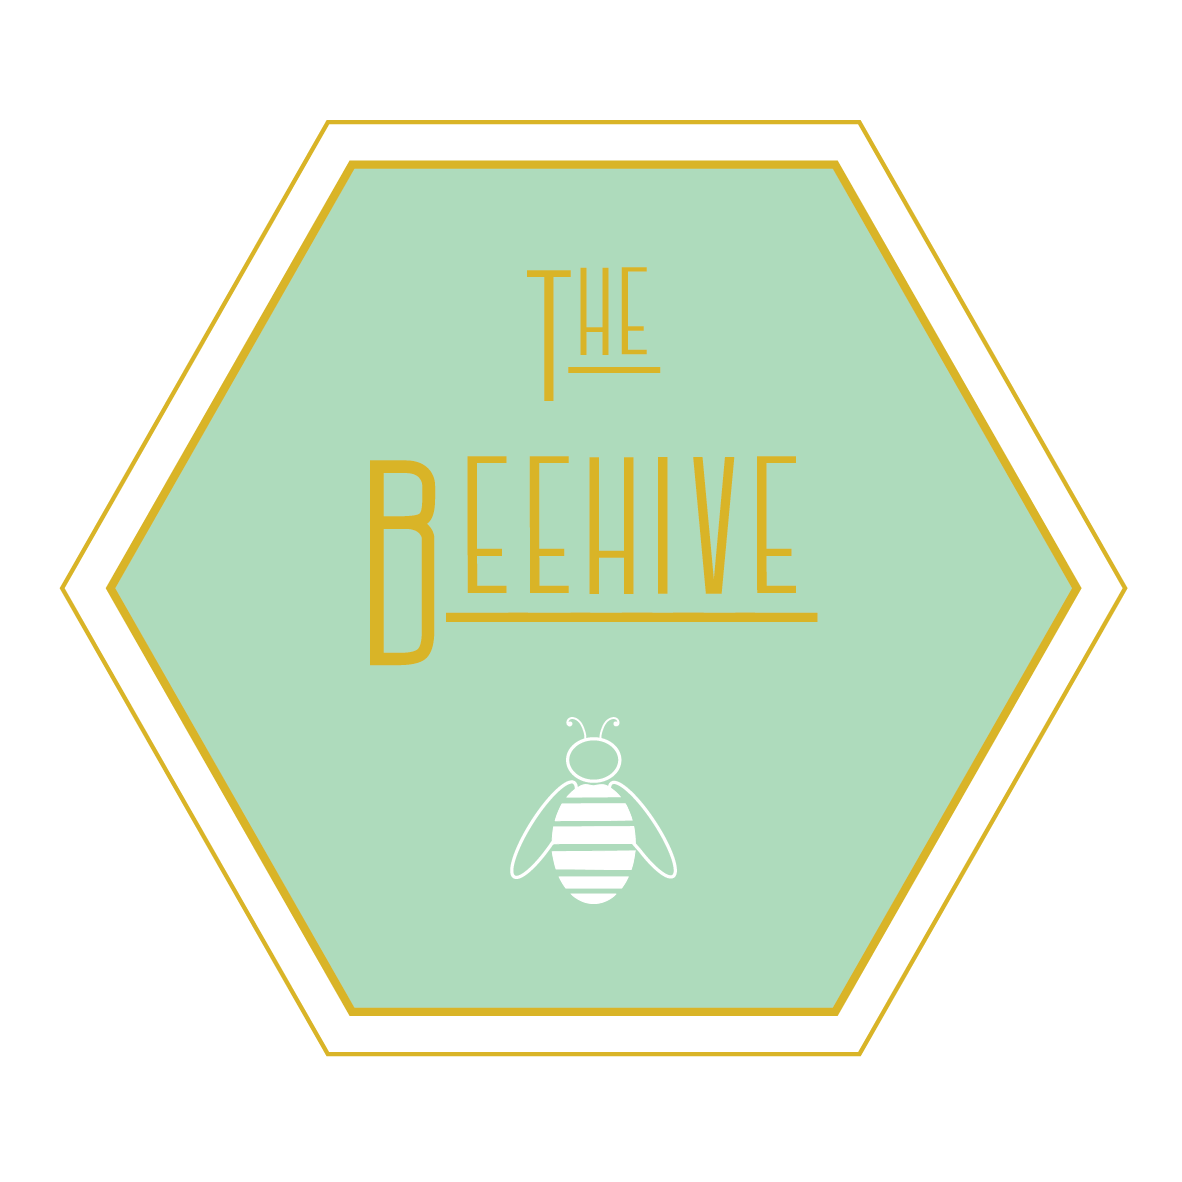 The Beehive Network